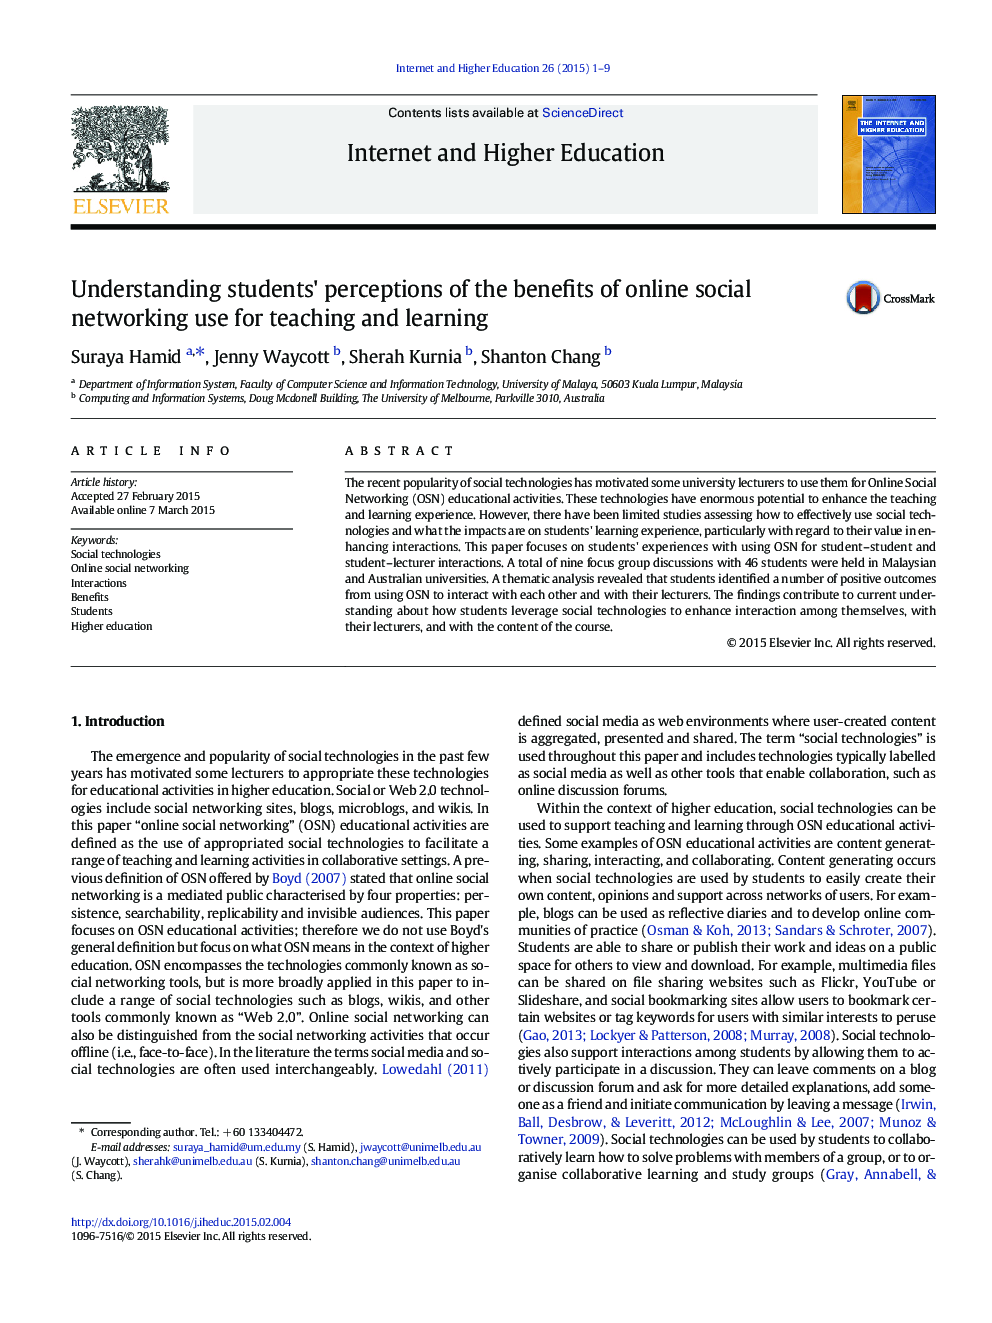 Understanding students' perceptions of the benefits of online social networking use for teaching and learning